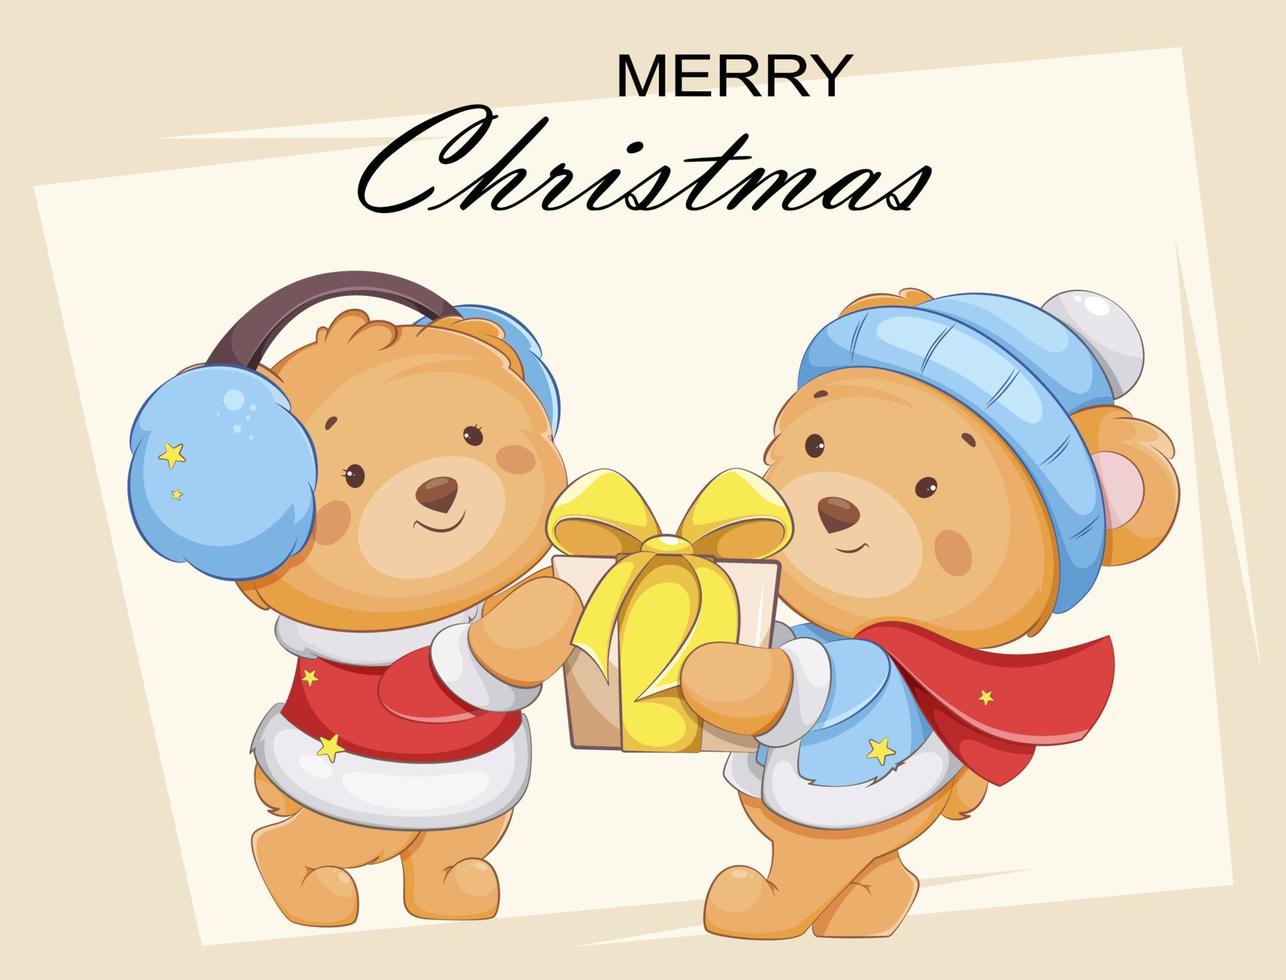 Two cute bears cartoon characters with gift box vector